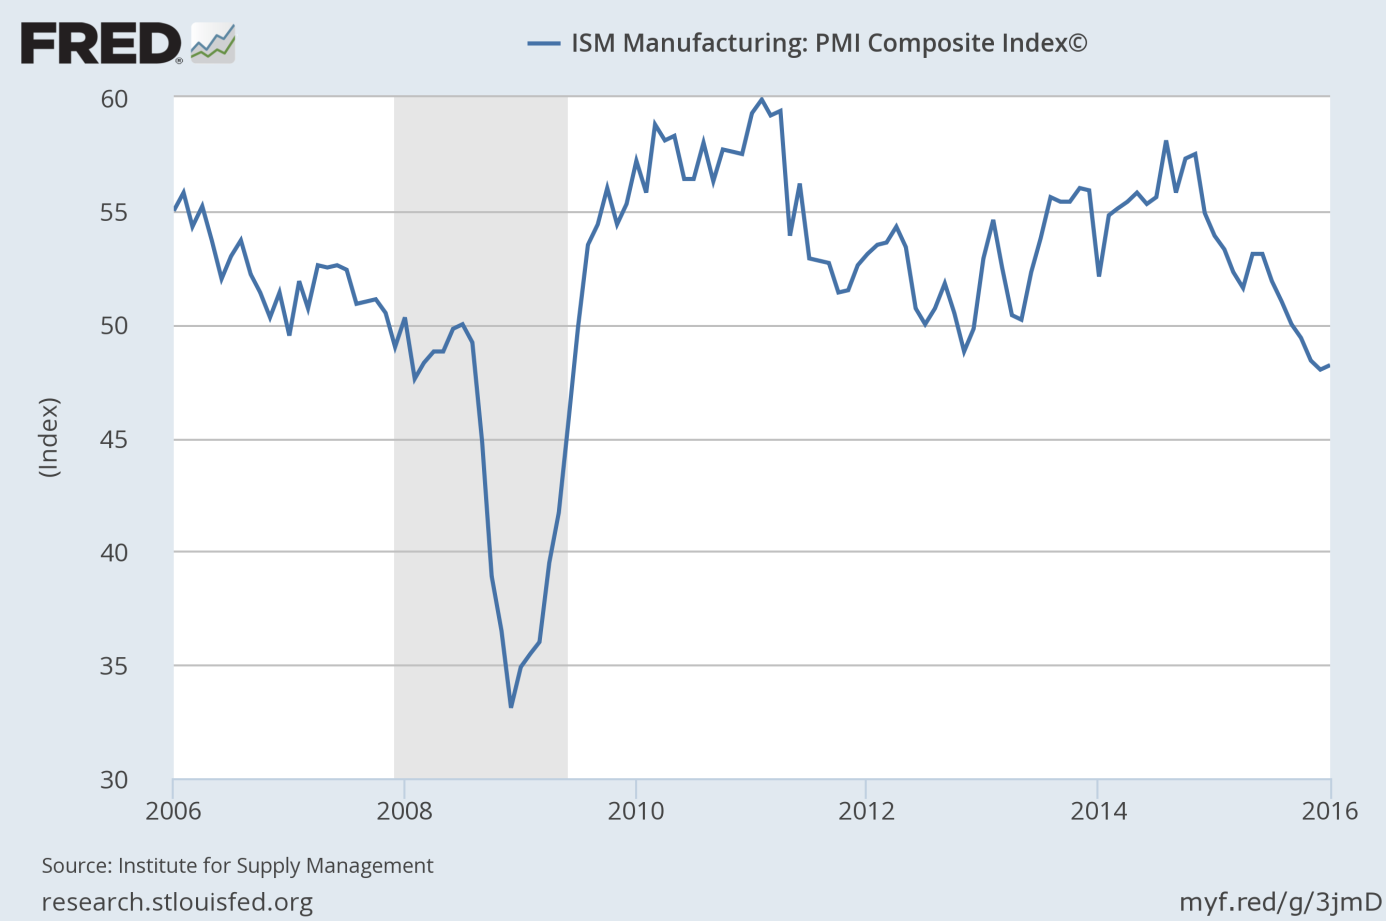 ISM Manufacturing Index from 2006 to 2016.